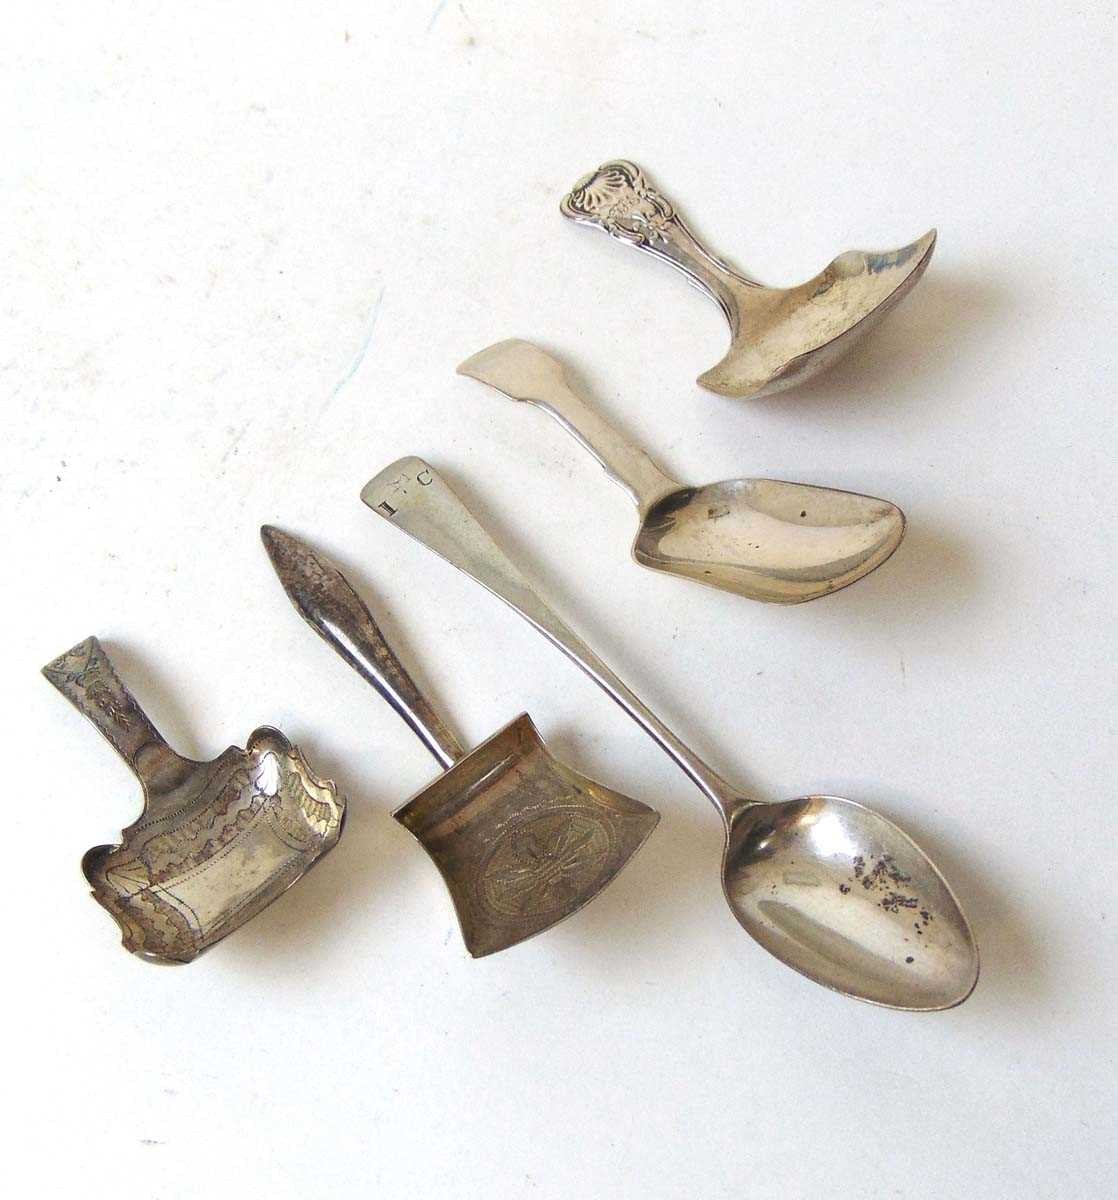 Four early 19th century silver tea caddy spoons, and a Georgian silver teaspoon, various dates and